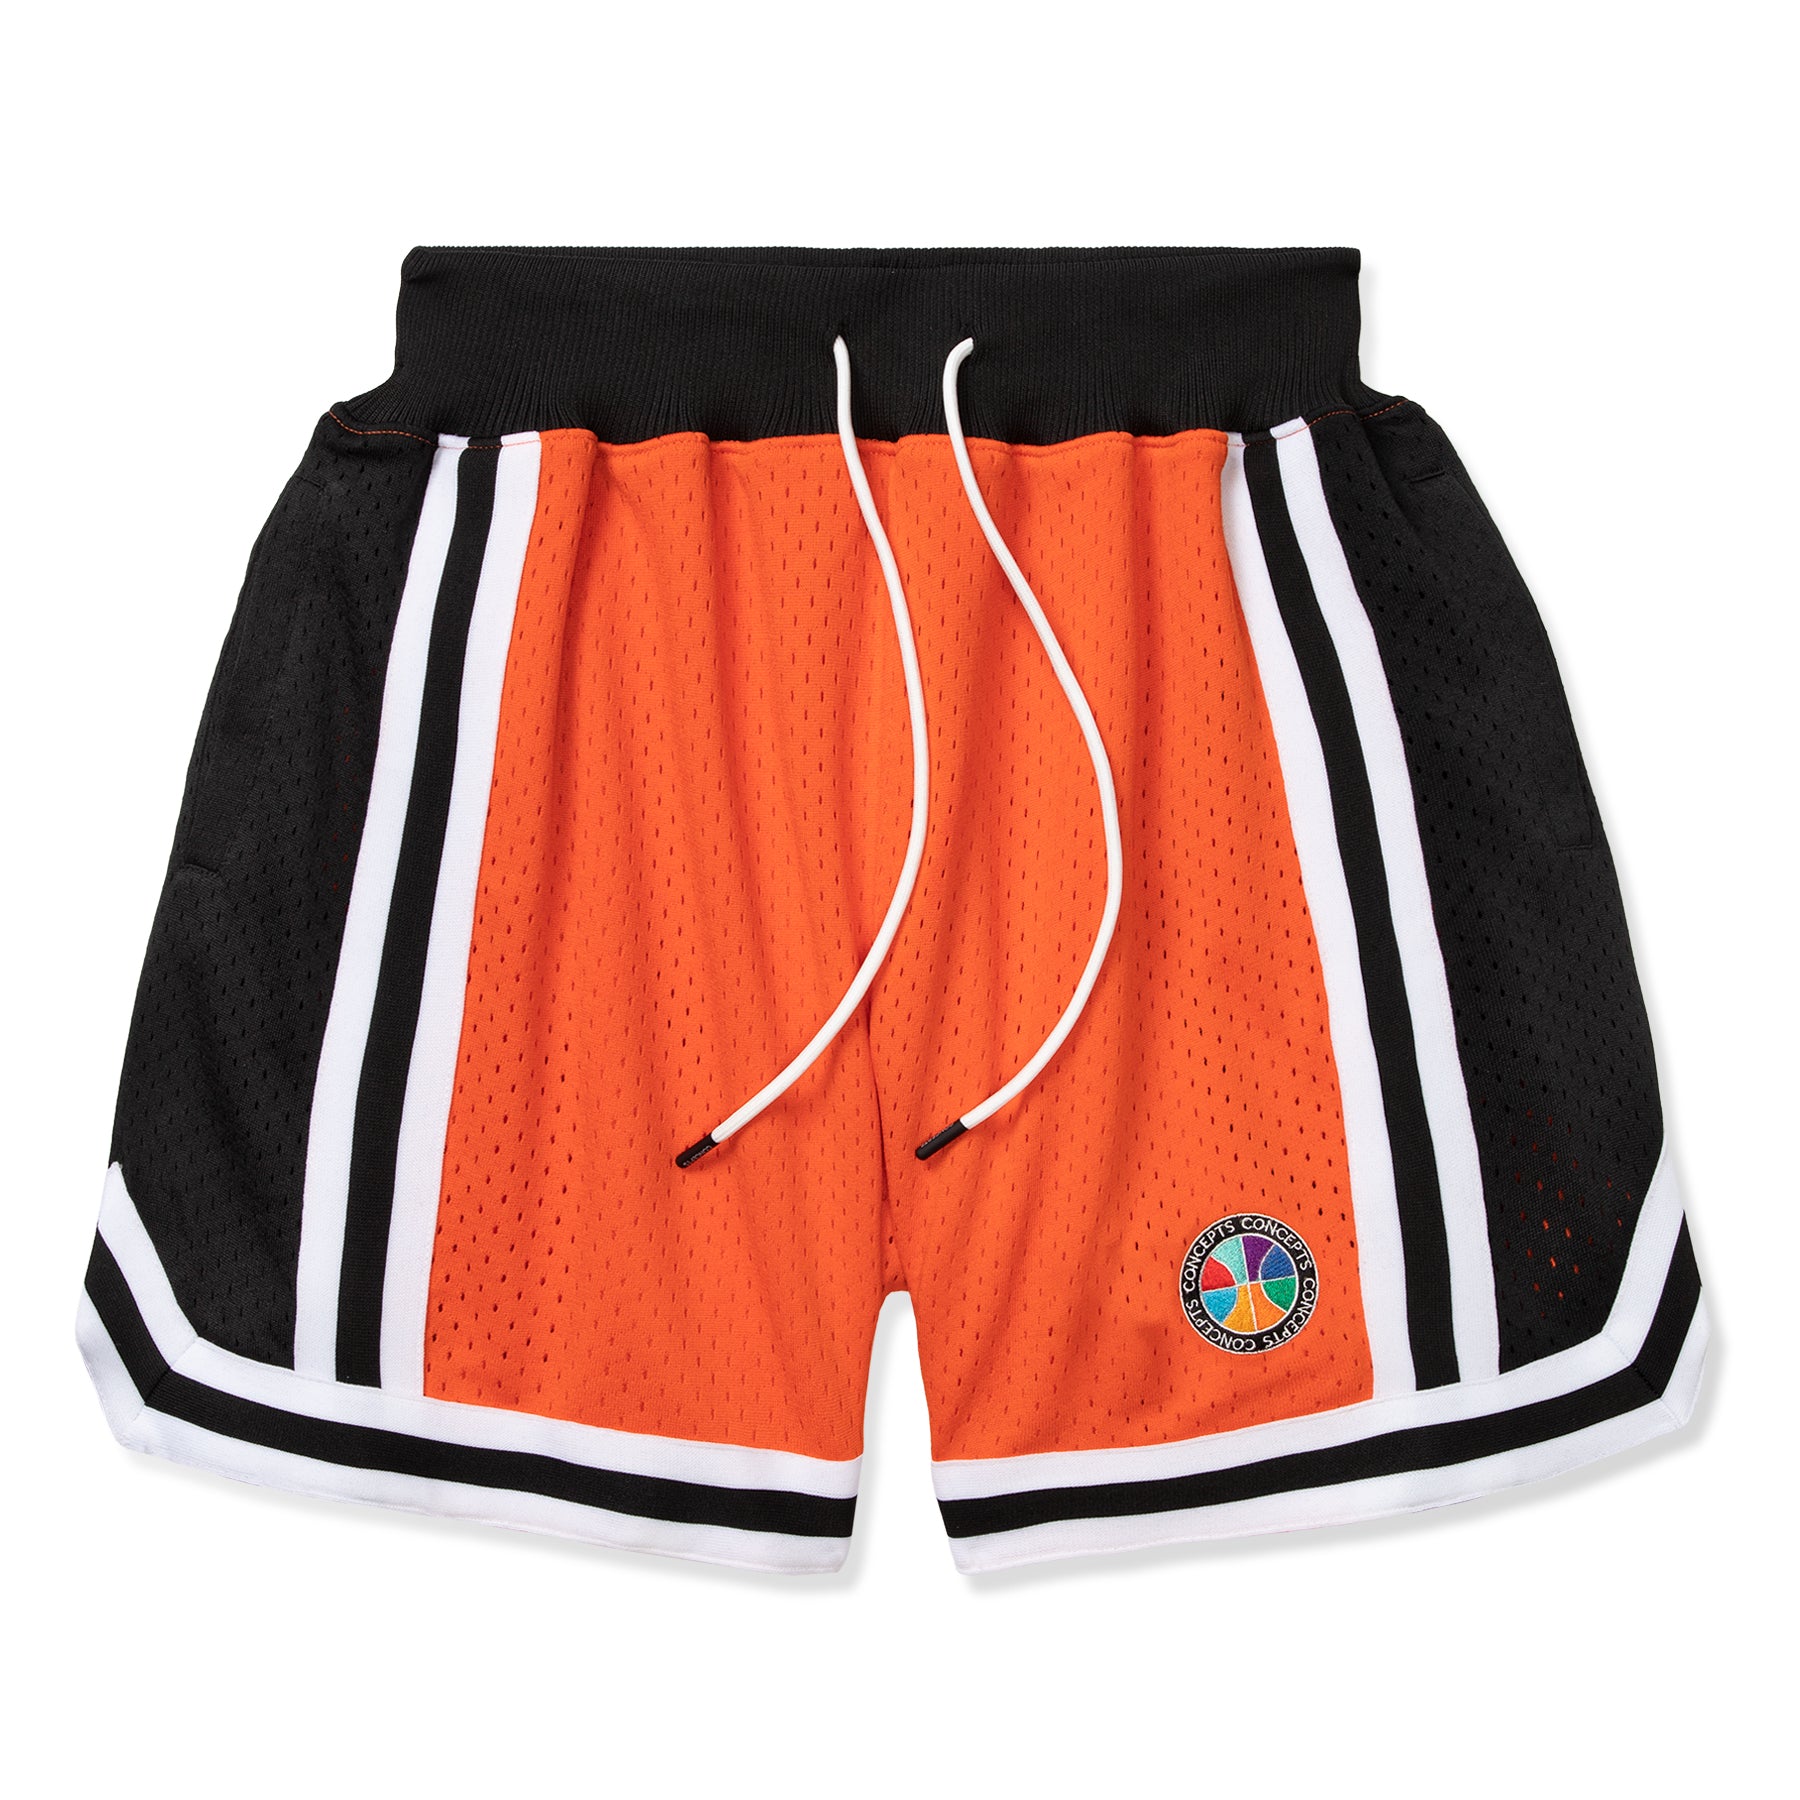 Logo Baggy Fit Basketball Shorts, RED